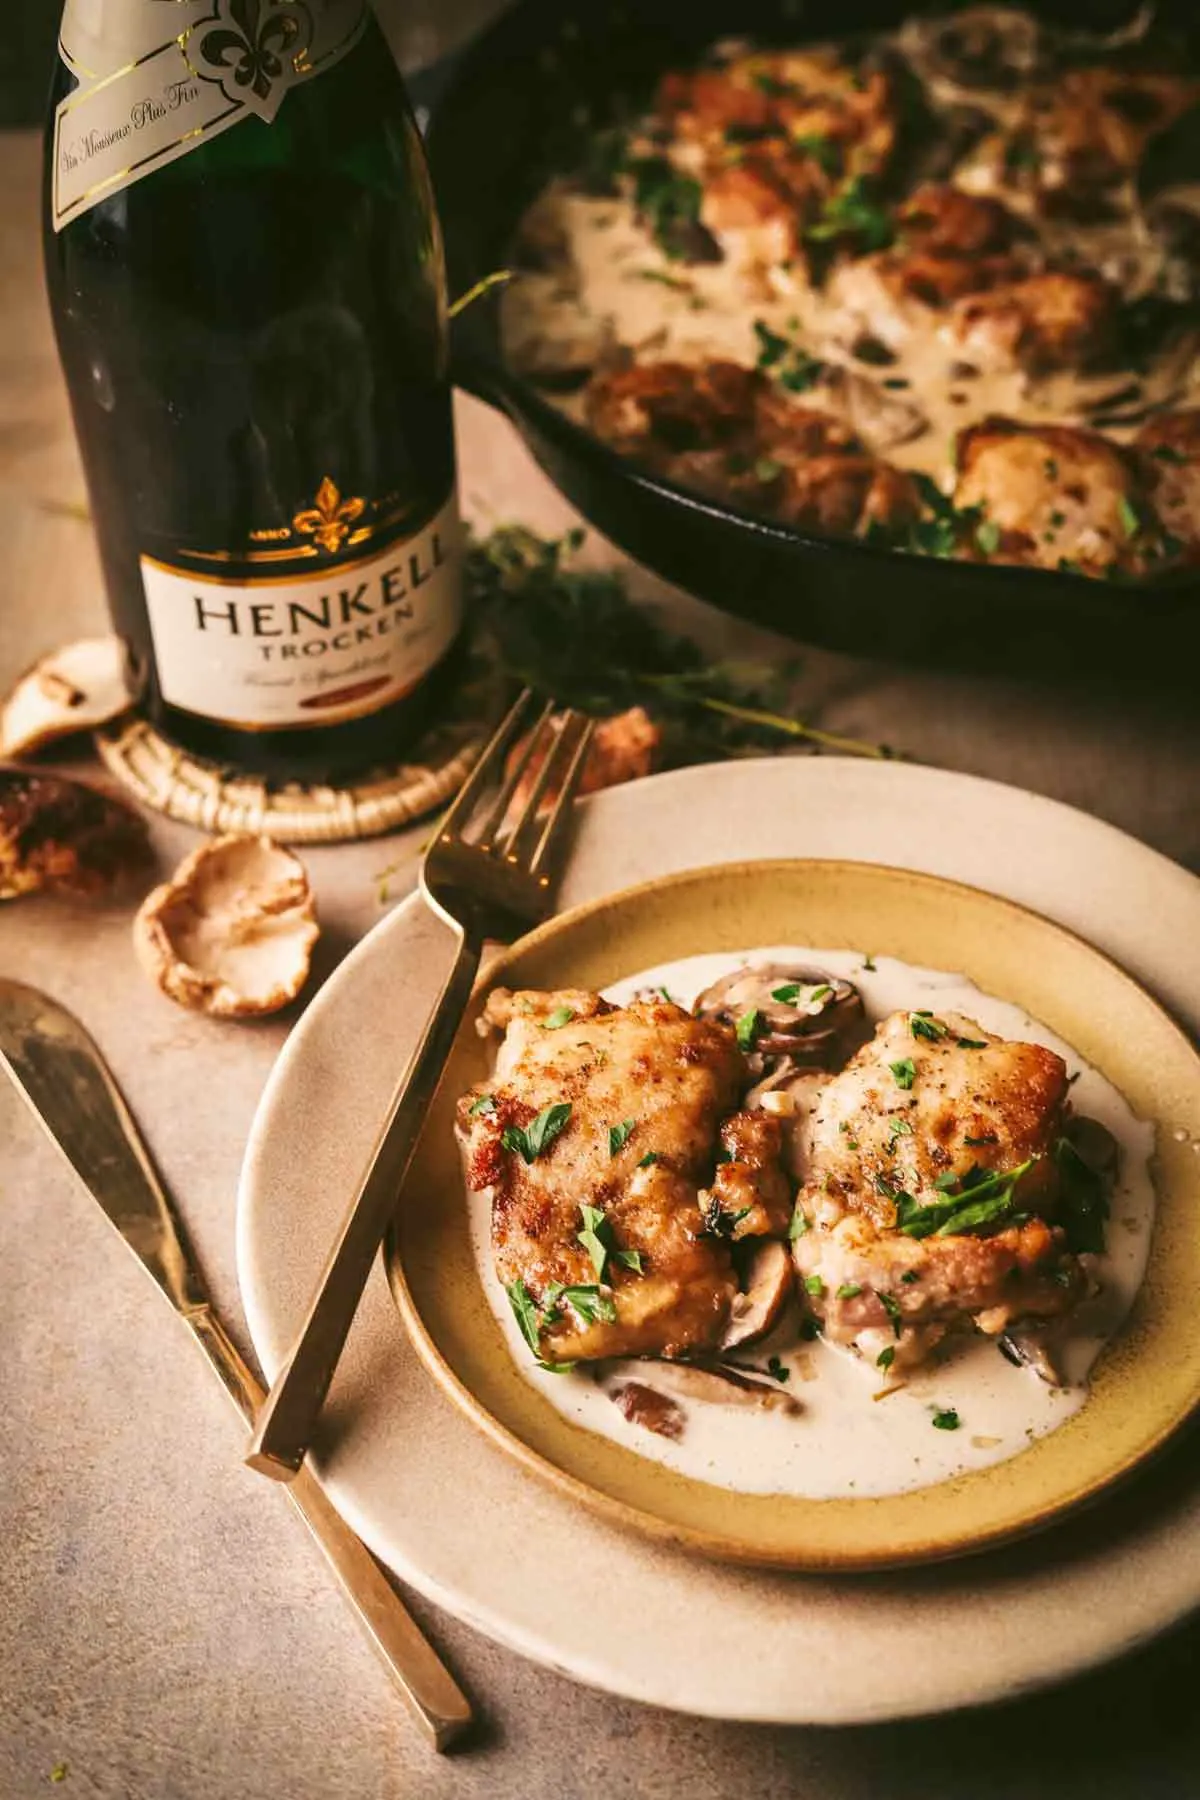 wo champagne chicken thighs on a plate with cream sauce. bottle of champagne in the background.